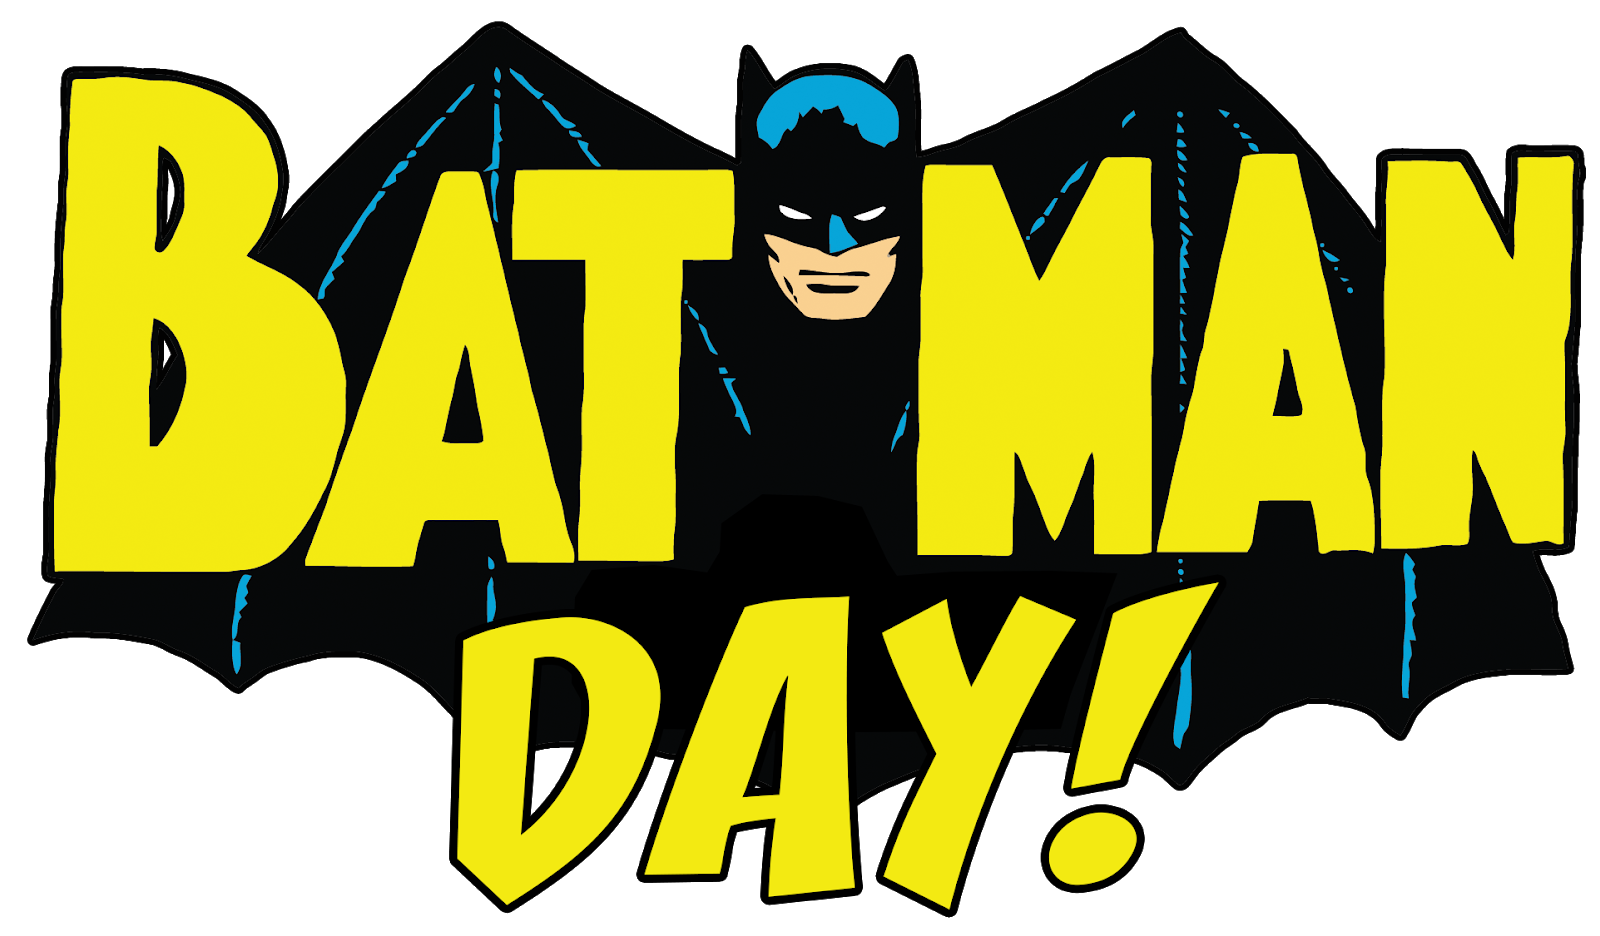 The Doctor Knows Batman Day is here this Saturday, September 21!